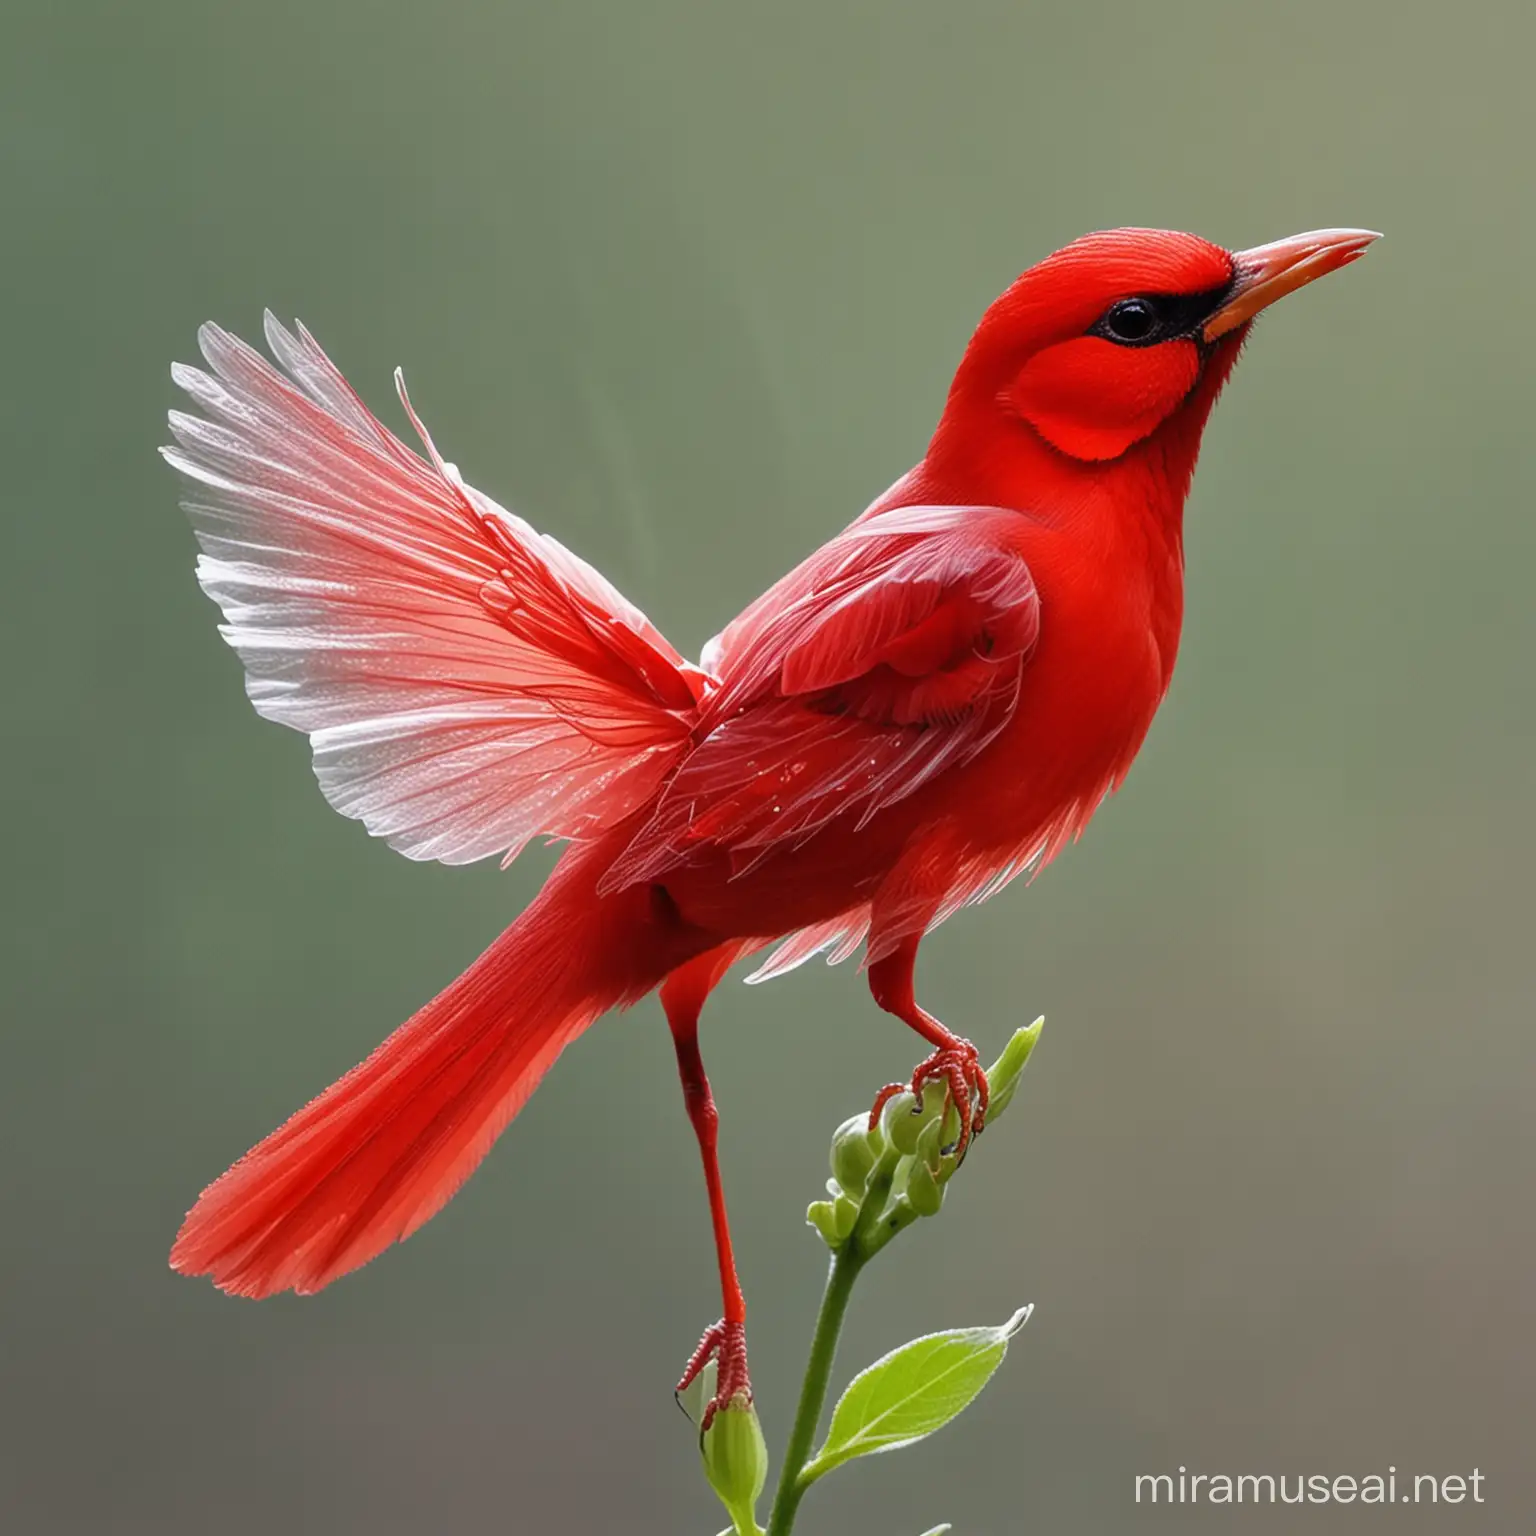 Vibrant Red BirdLike Flower in Crystal Clear Transparency